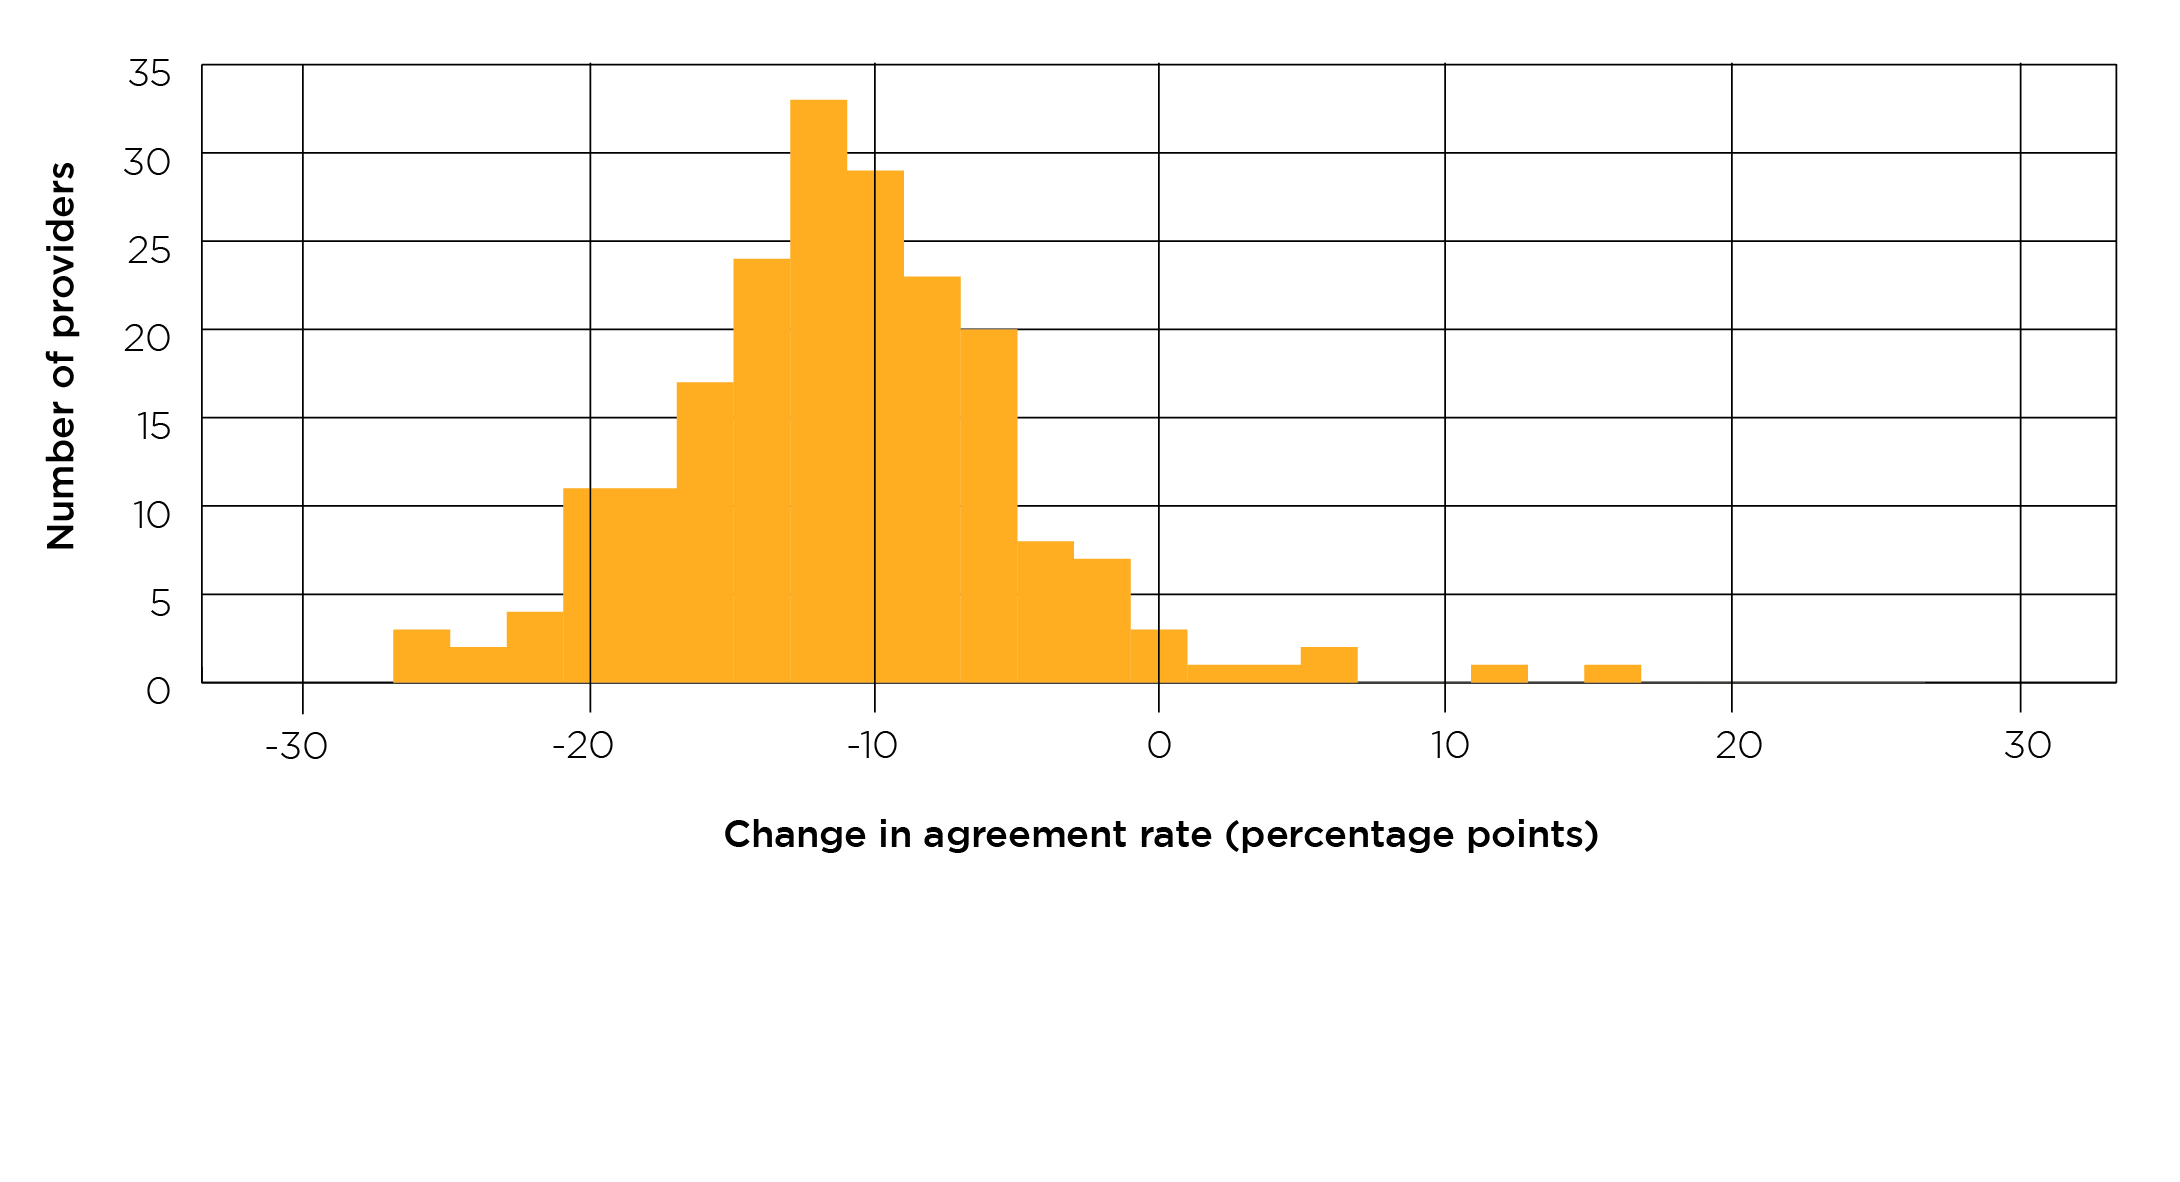 Figure 2: Changes in agreement rates for Scale 6 (learning resources)